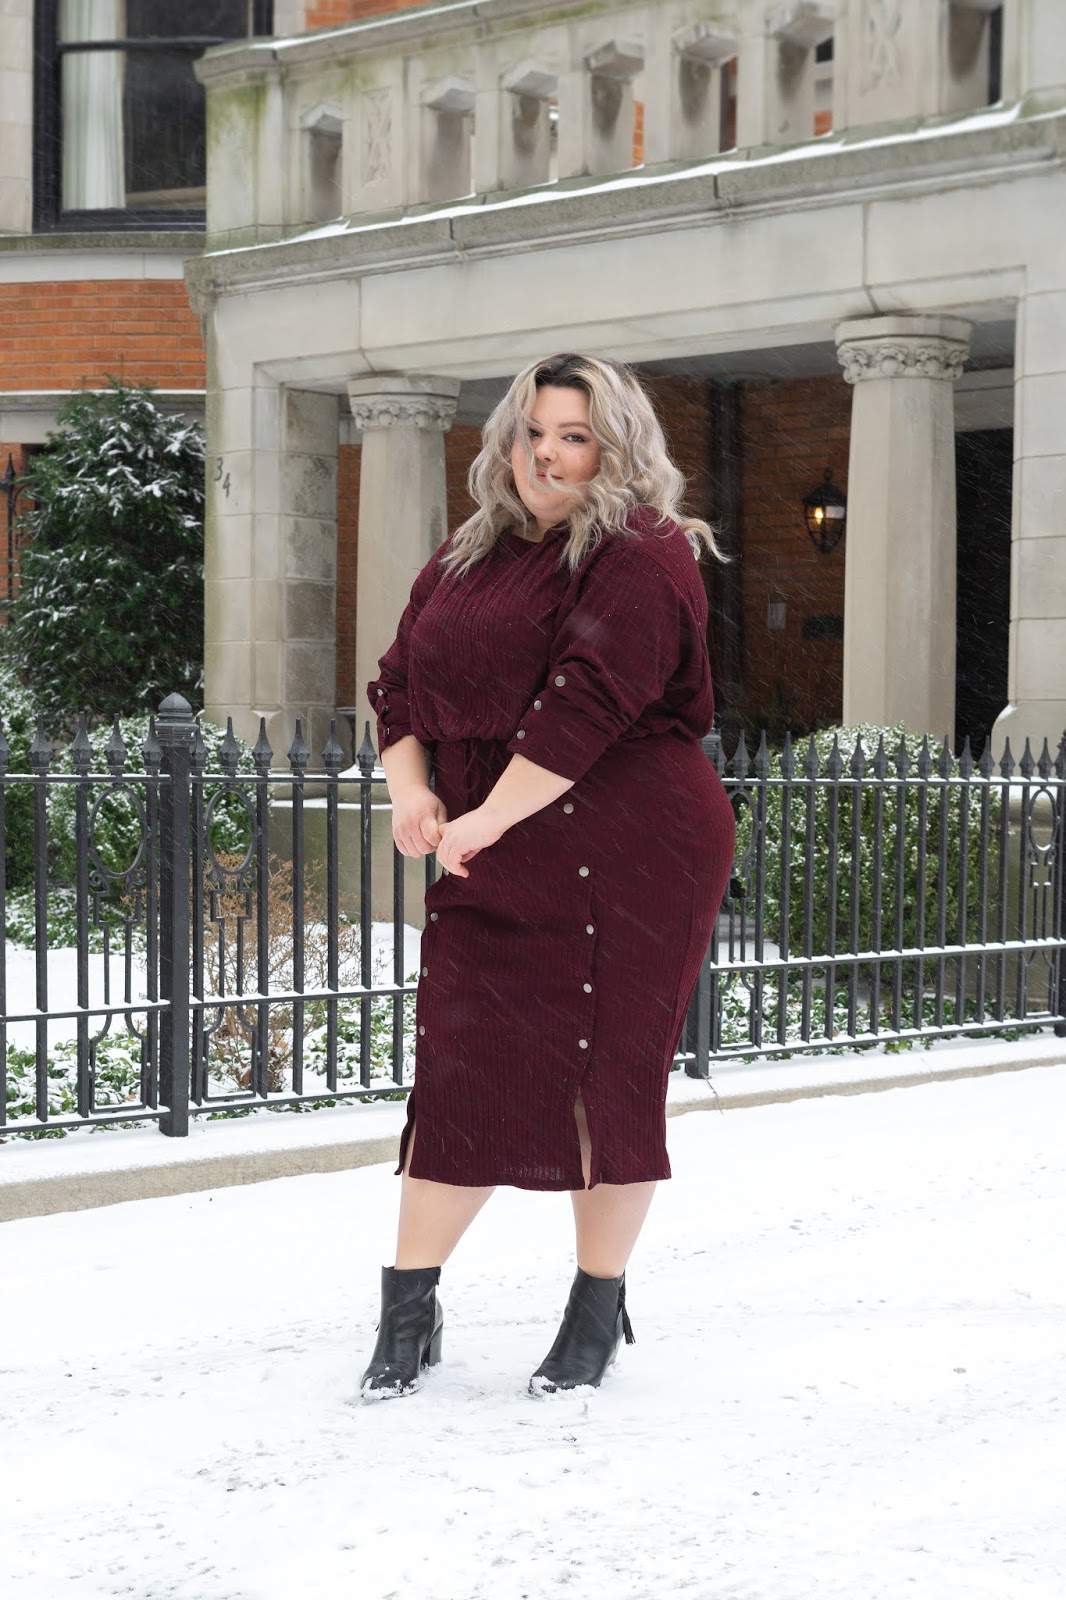 Chicago Plus Size Petite Fashion Blogger, youtuber, and model Natalie Craig, of Natalie in the City, reviews Soncy's Ruby Red Midi Skirt and Cropped Top.